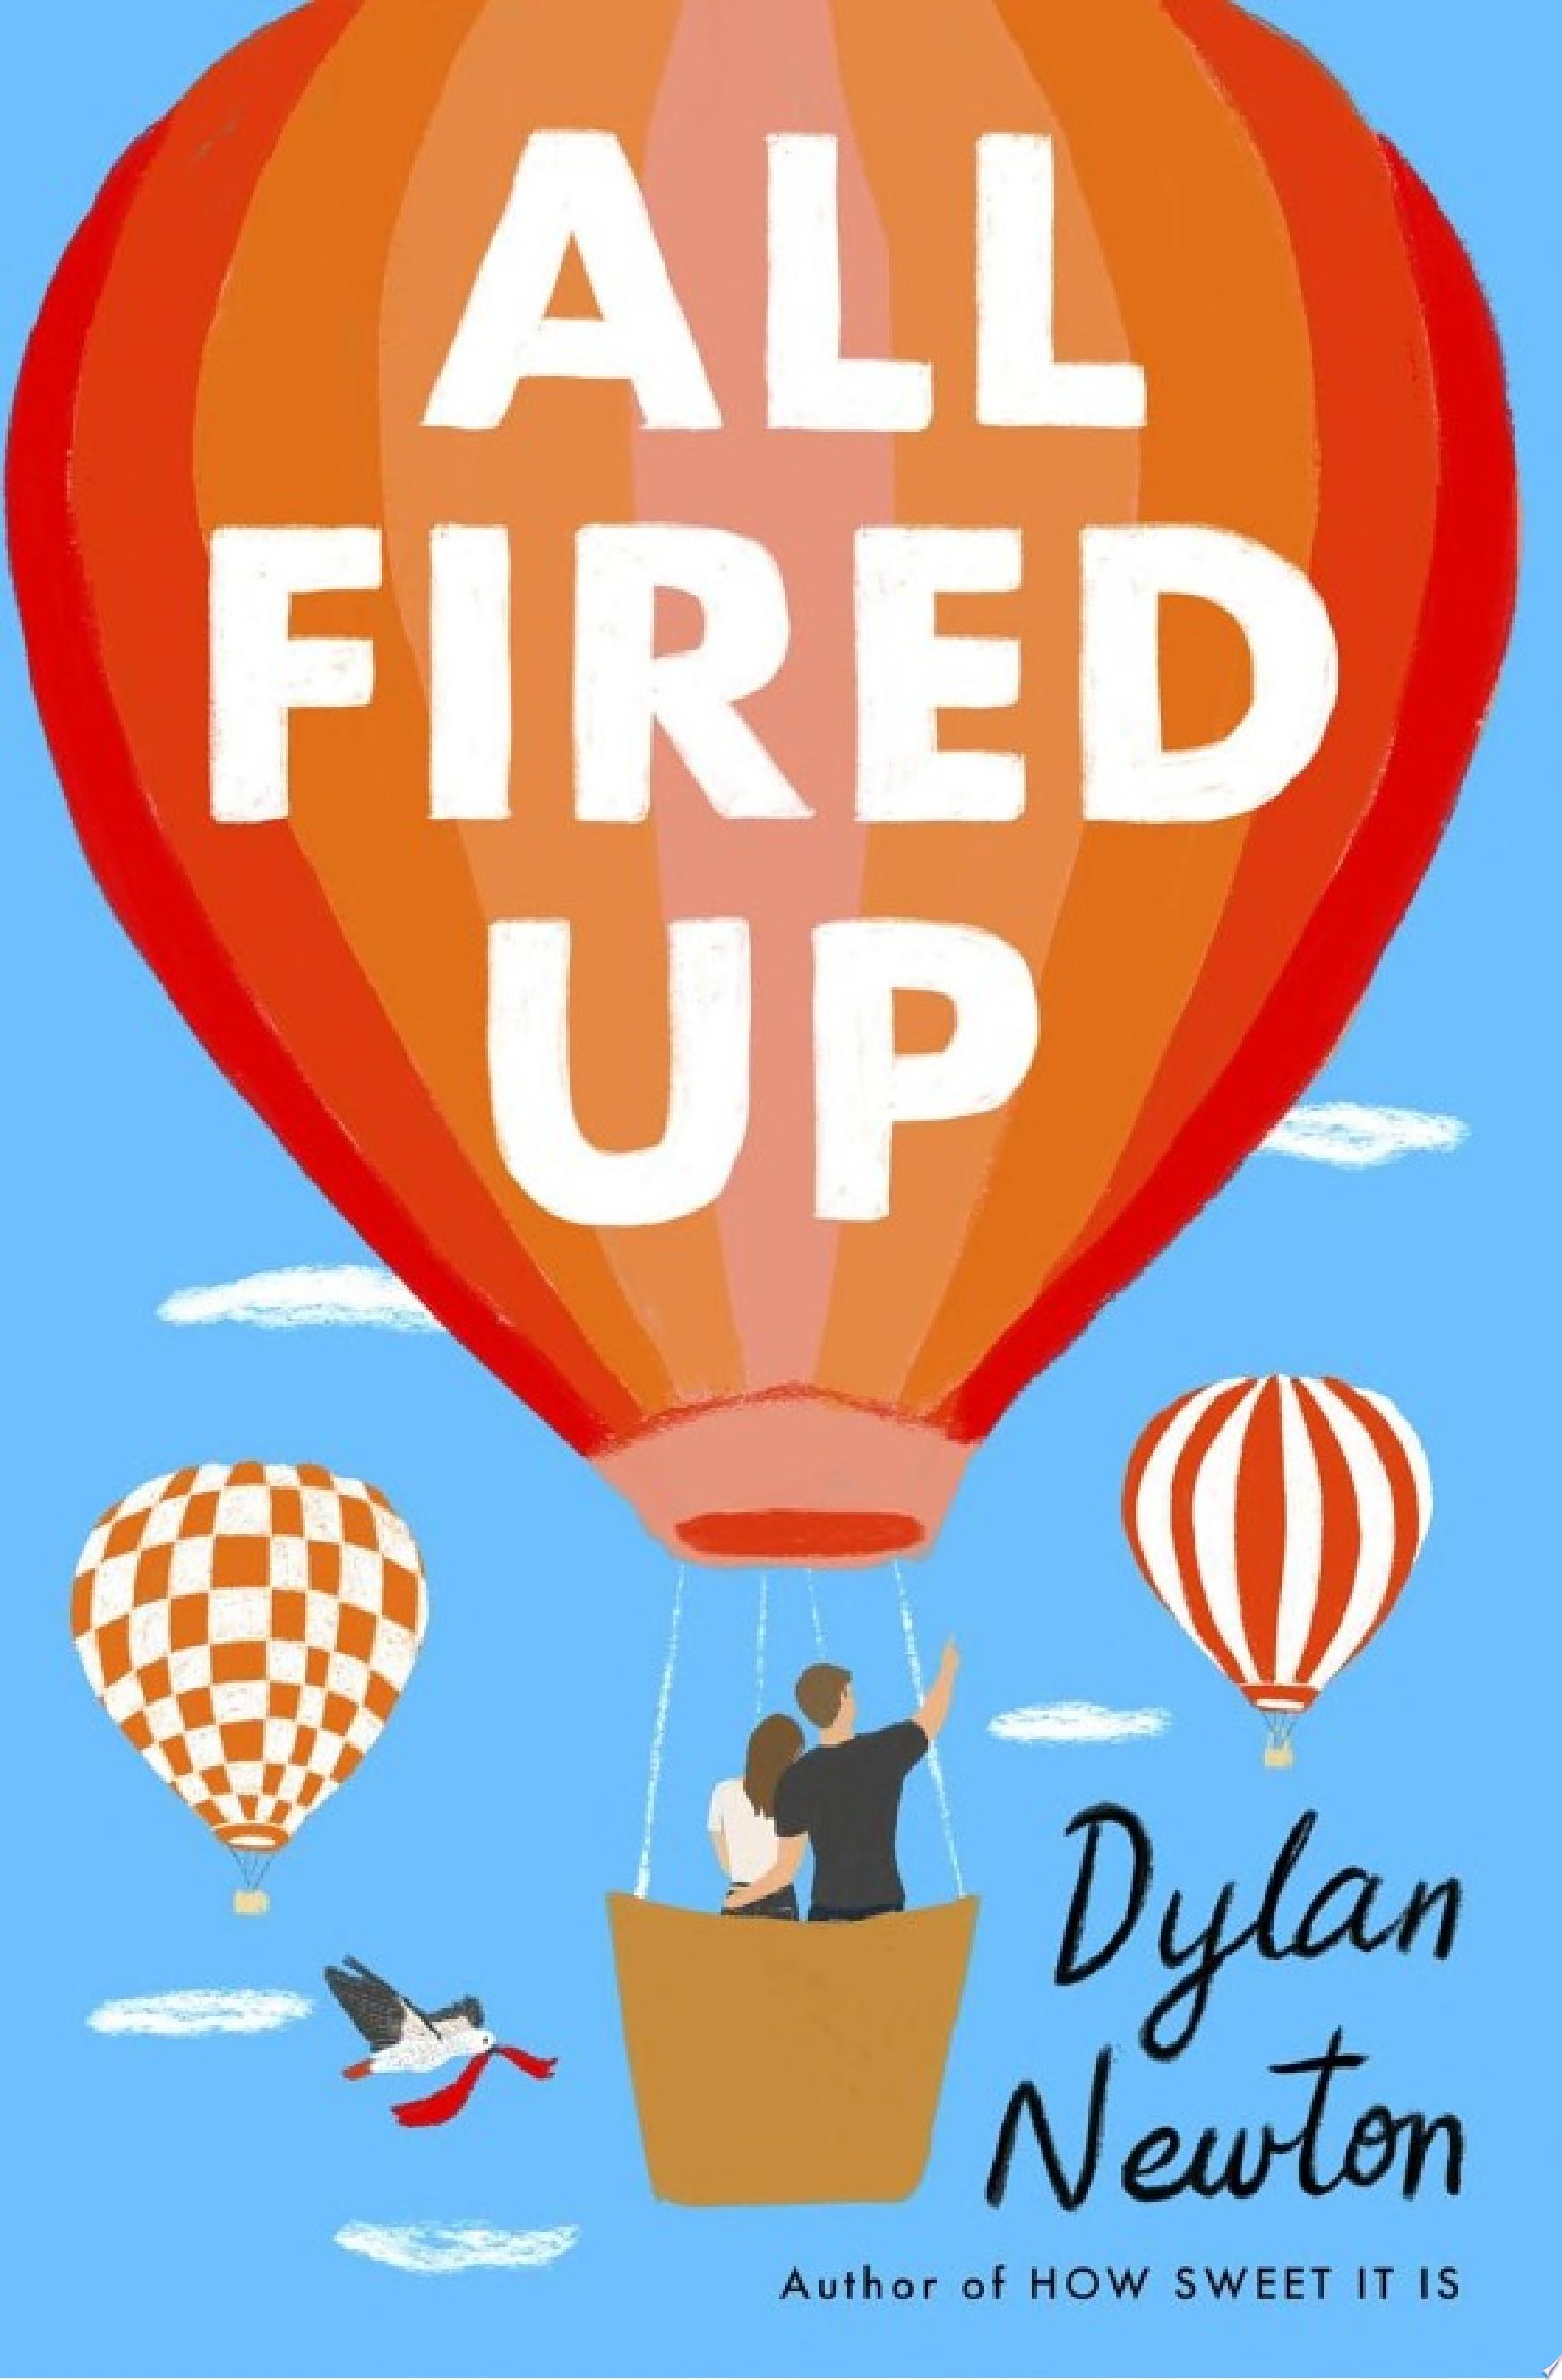 Image for "All Fired Up"